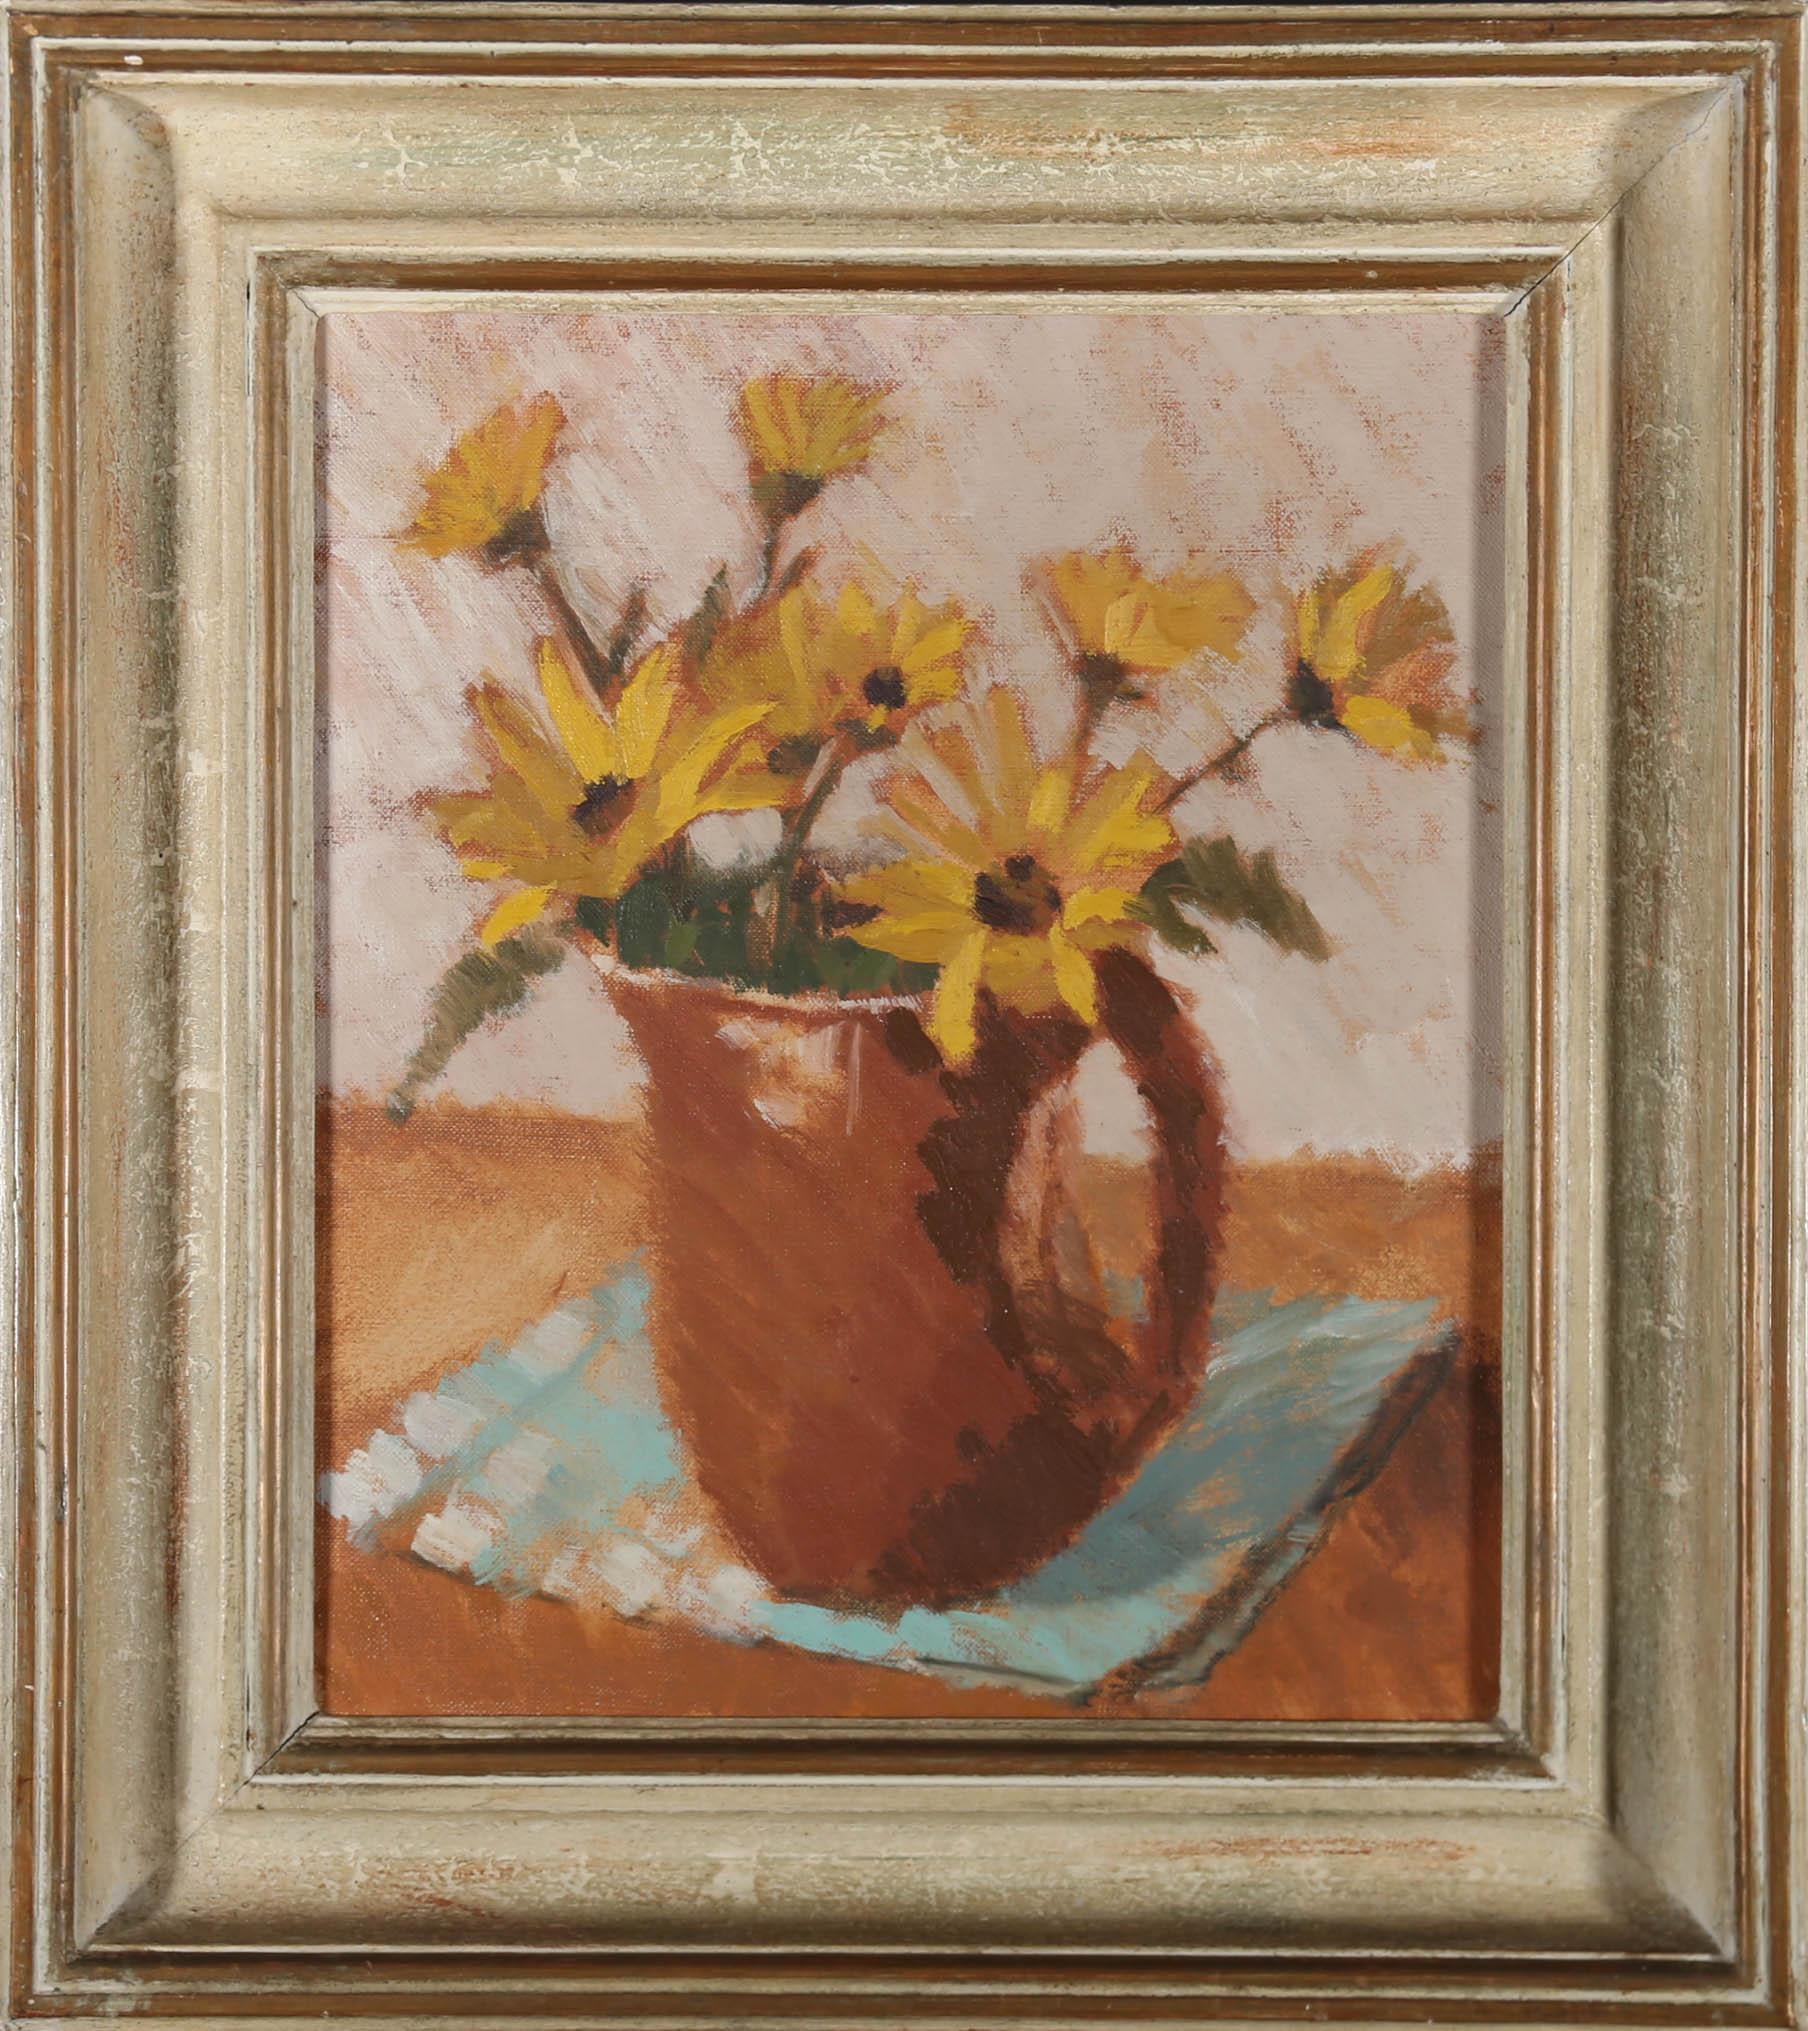 Full of natural light and movement, this spritely still life depicts yellow Rudbeckia opening up inside a terracotta jug. Unsigned. Well presented in a handsome shabby chic frame. On canvas on stretchers. 